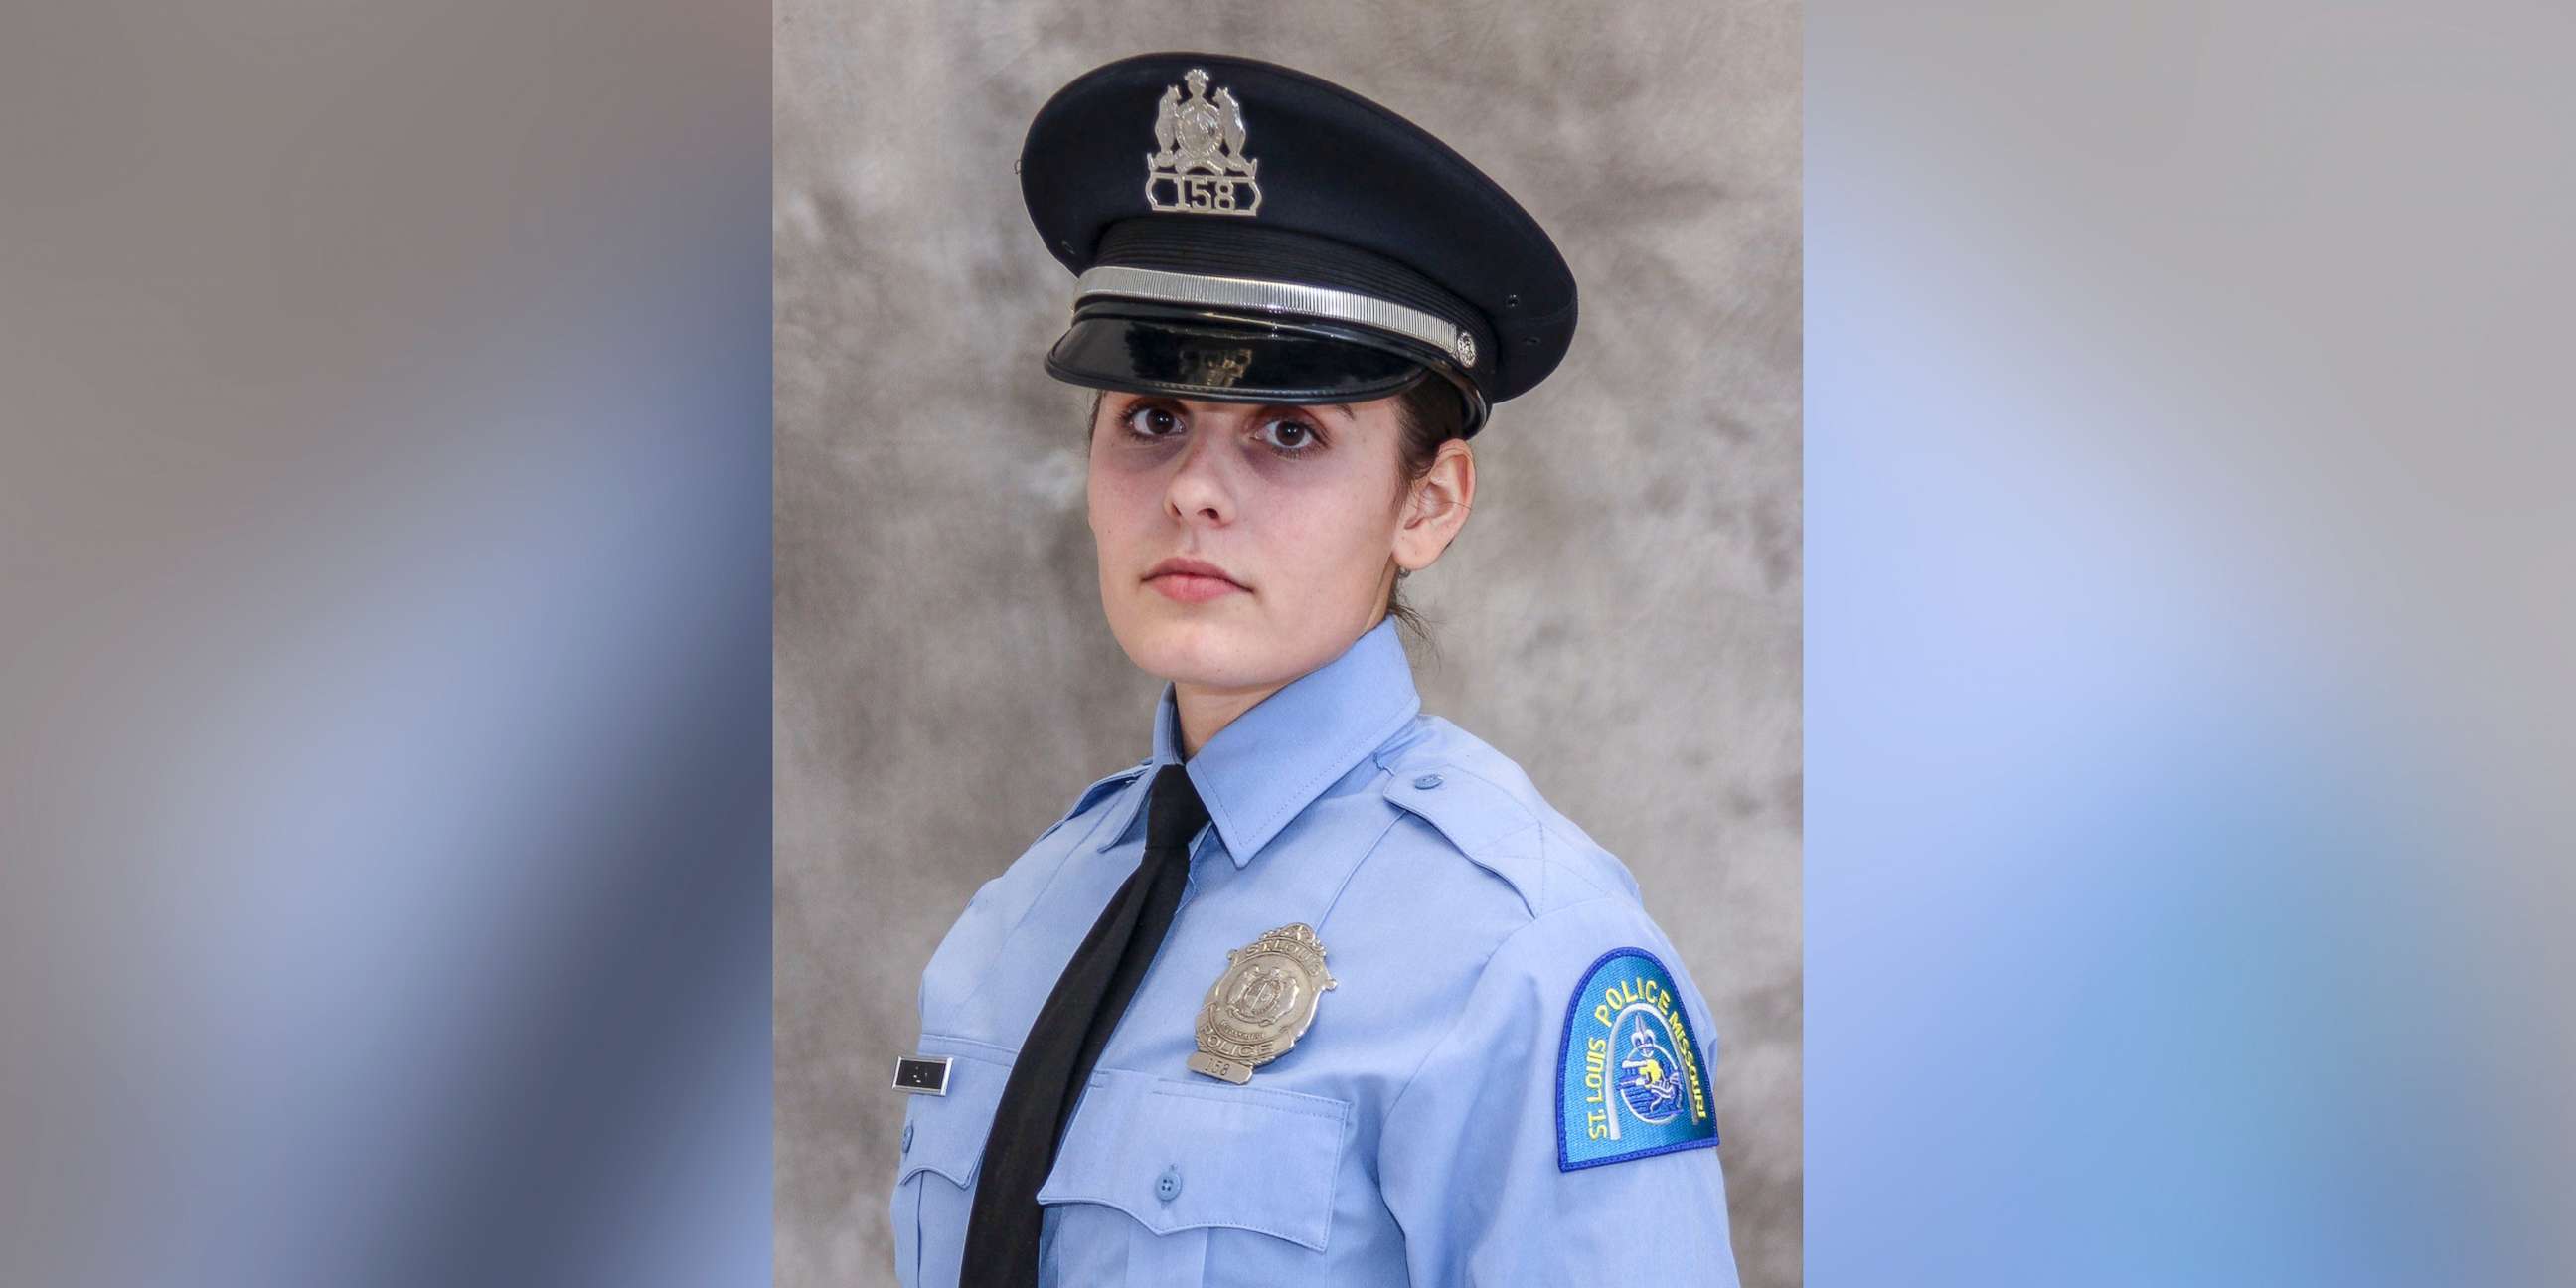 PHOTO: Officer Katlyn Alix, died after an officer "mishandled" a gun and accidentally shot and killed her early on Jan. 24, 2019, at an officer's home.